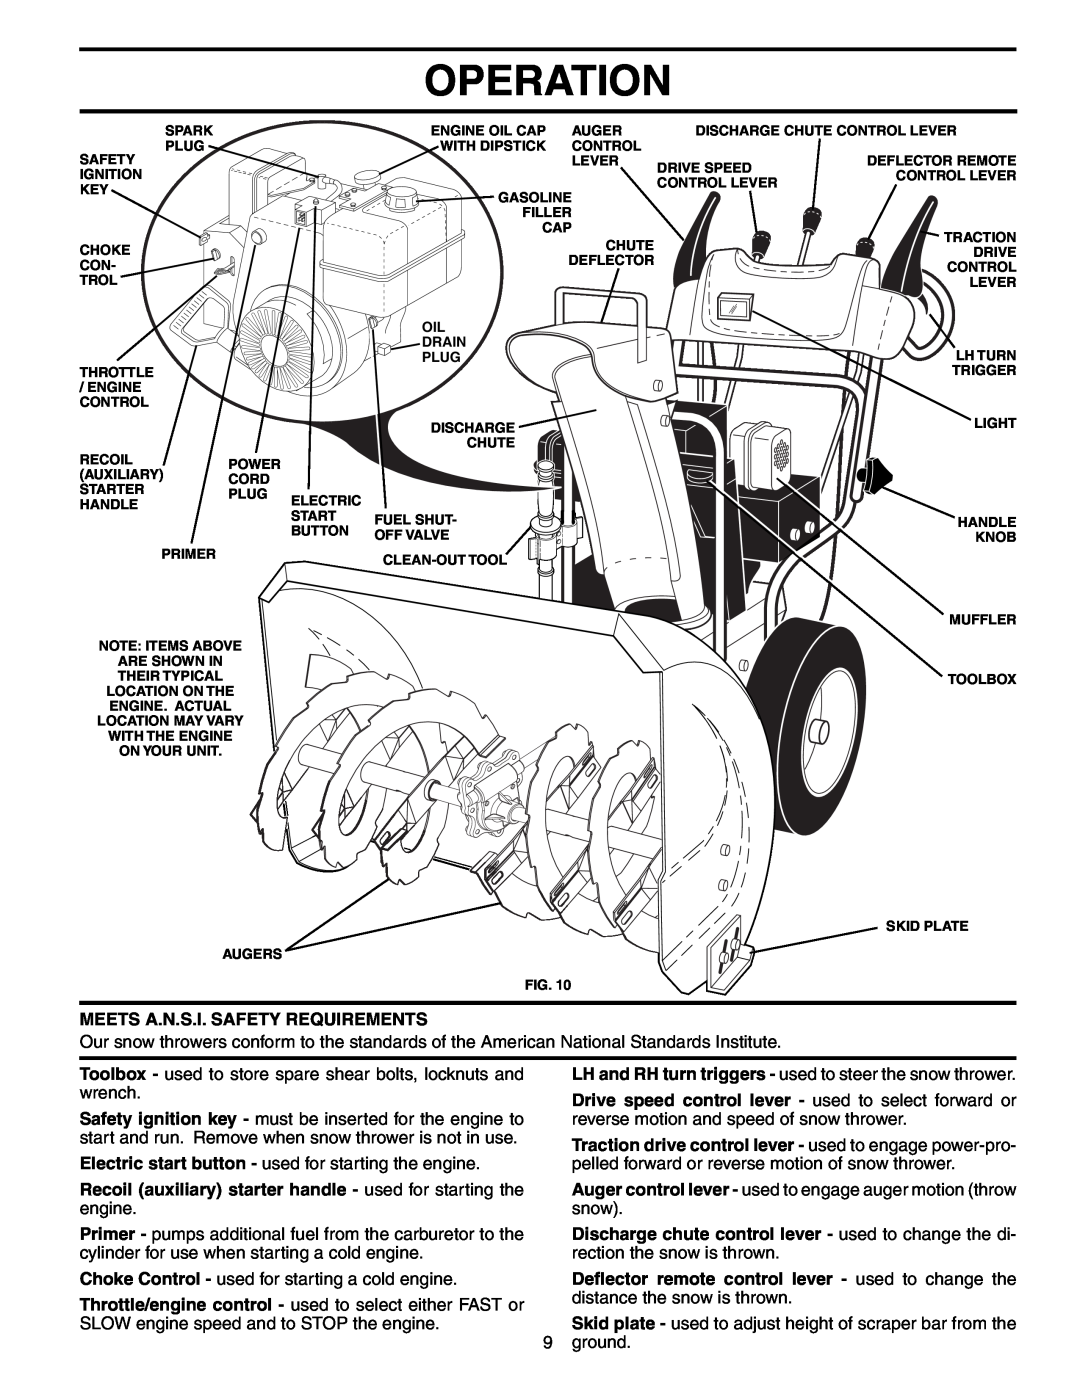 Poulan PP927ESC owner manual Operation, Meets A.N.S.I. Safety Requirements 